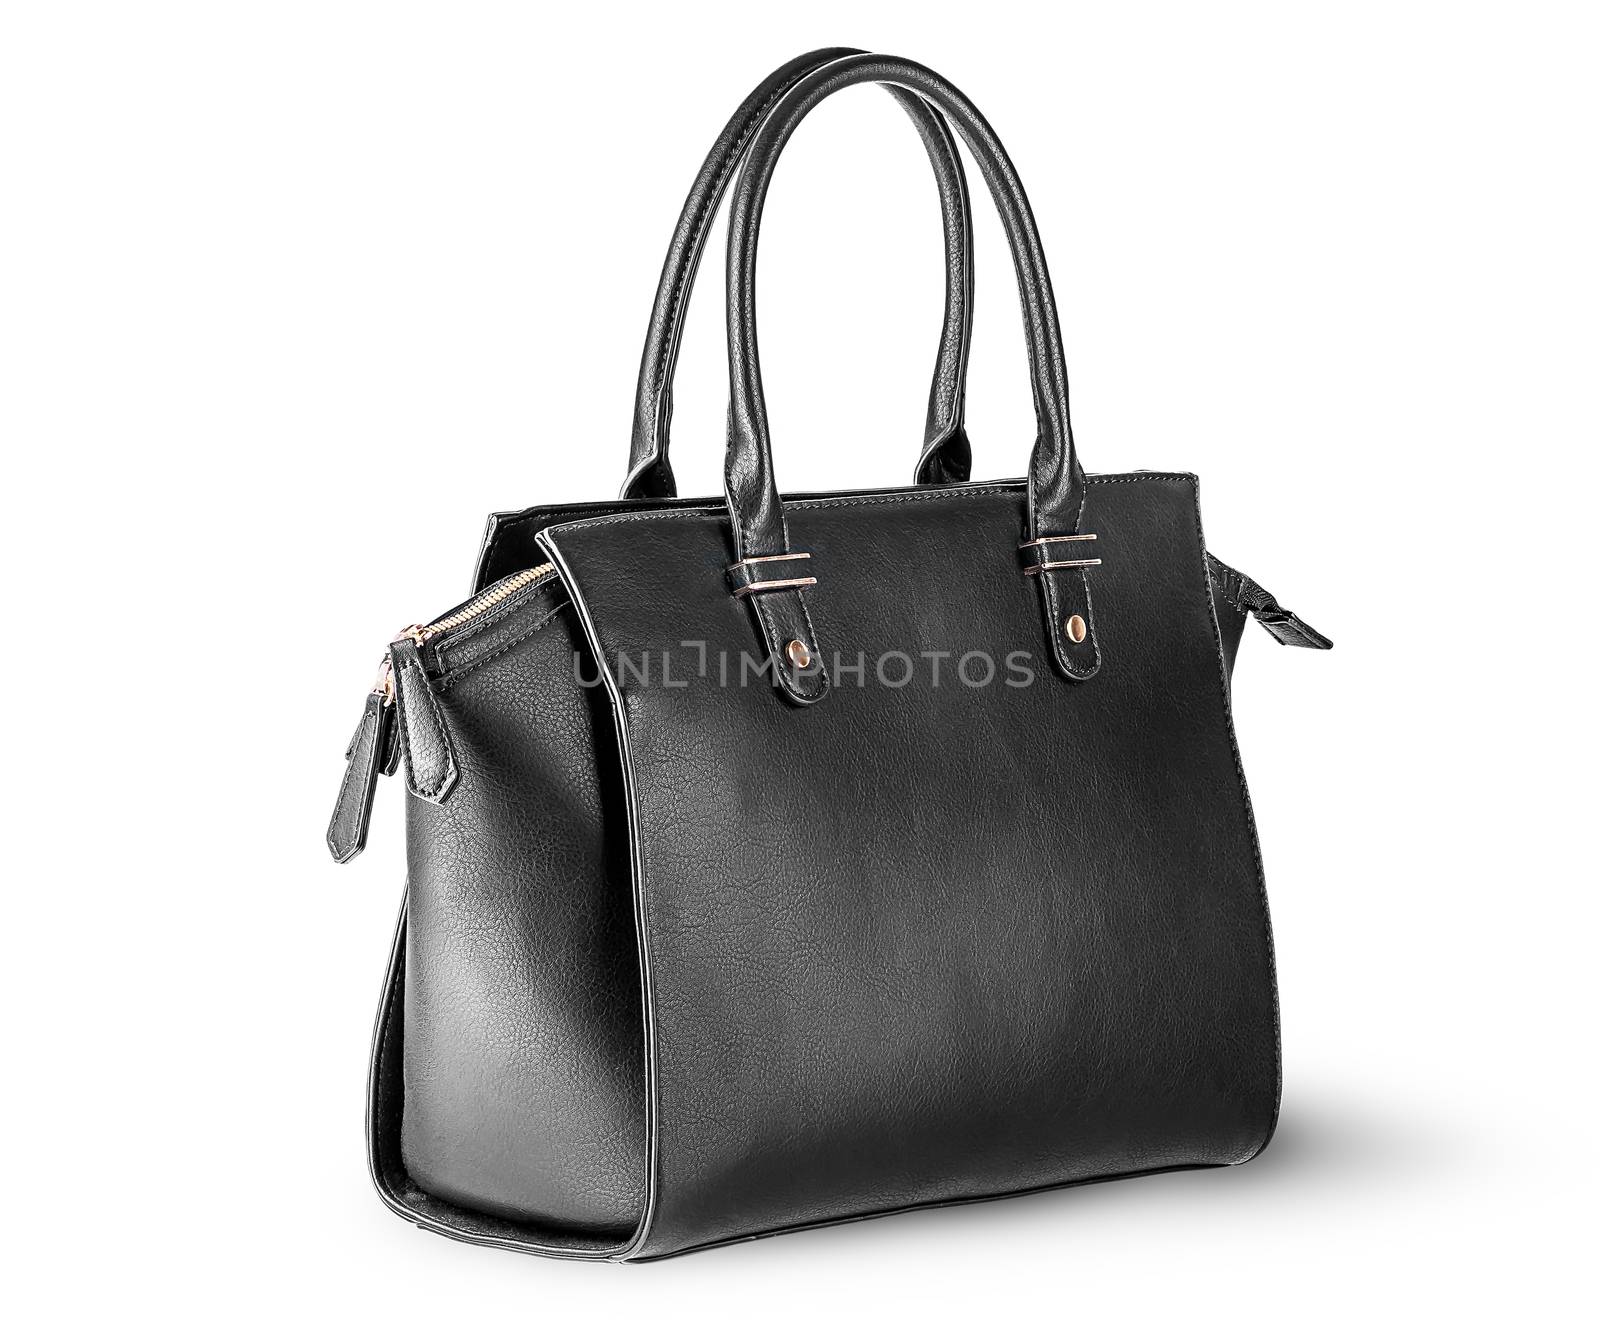 Ladies black leather bag rotated by Cipariss